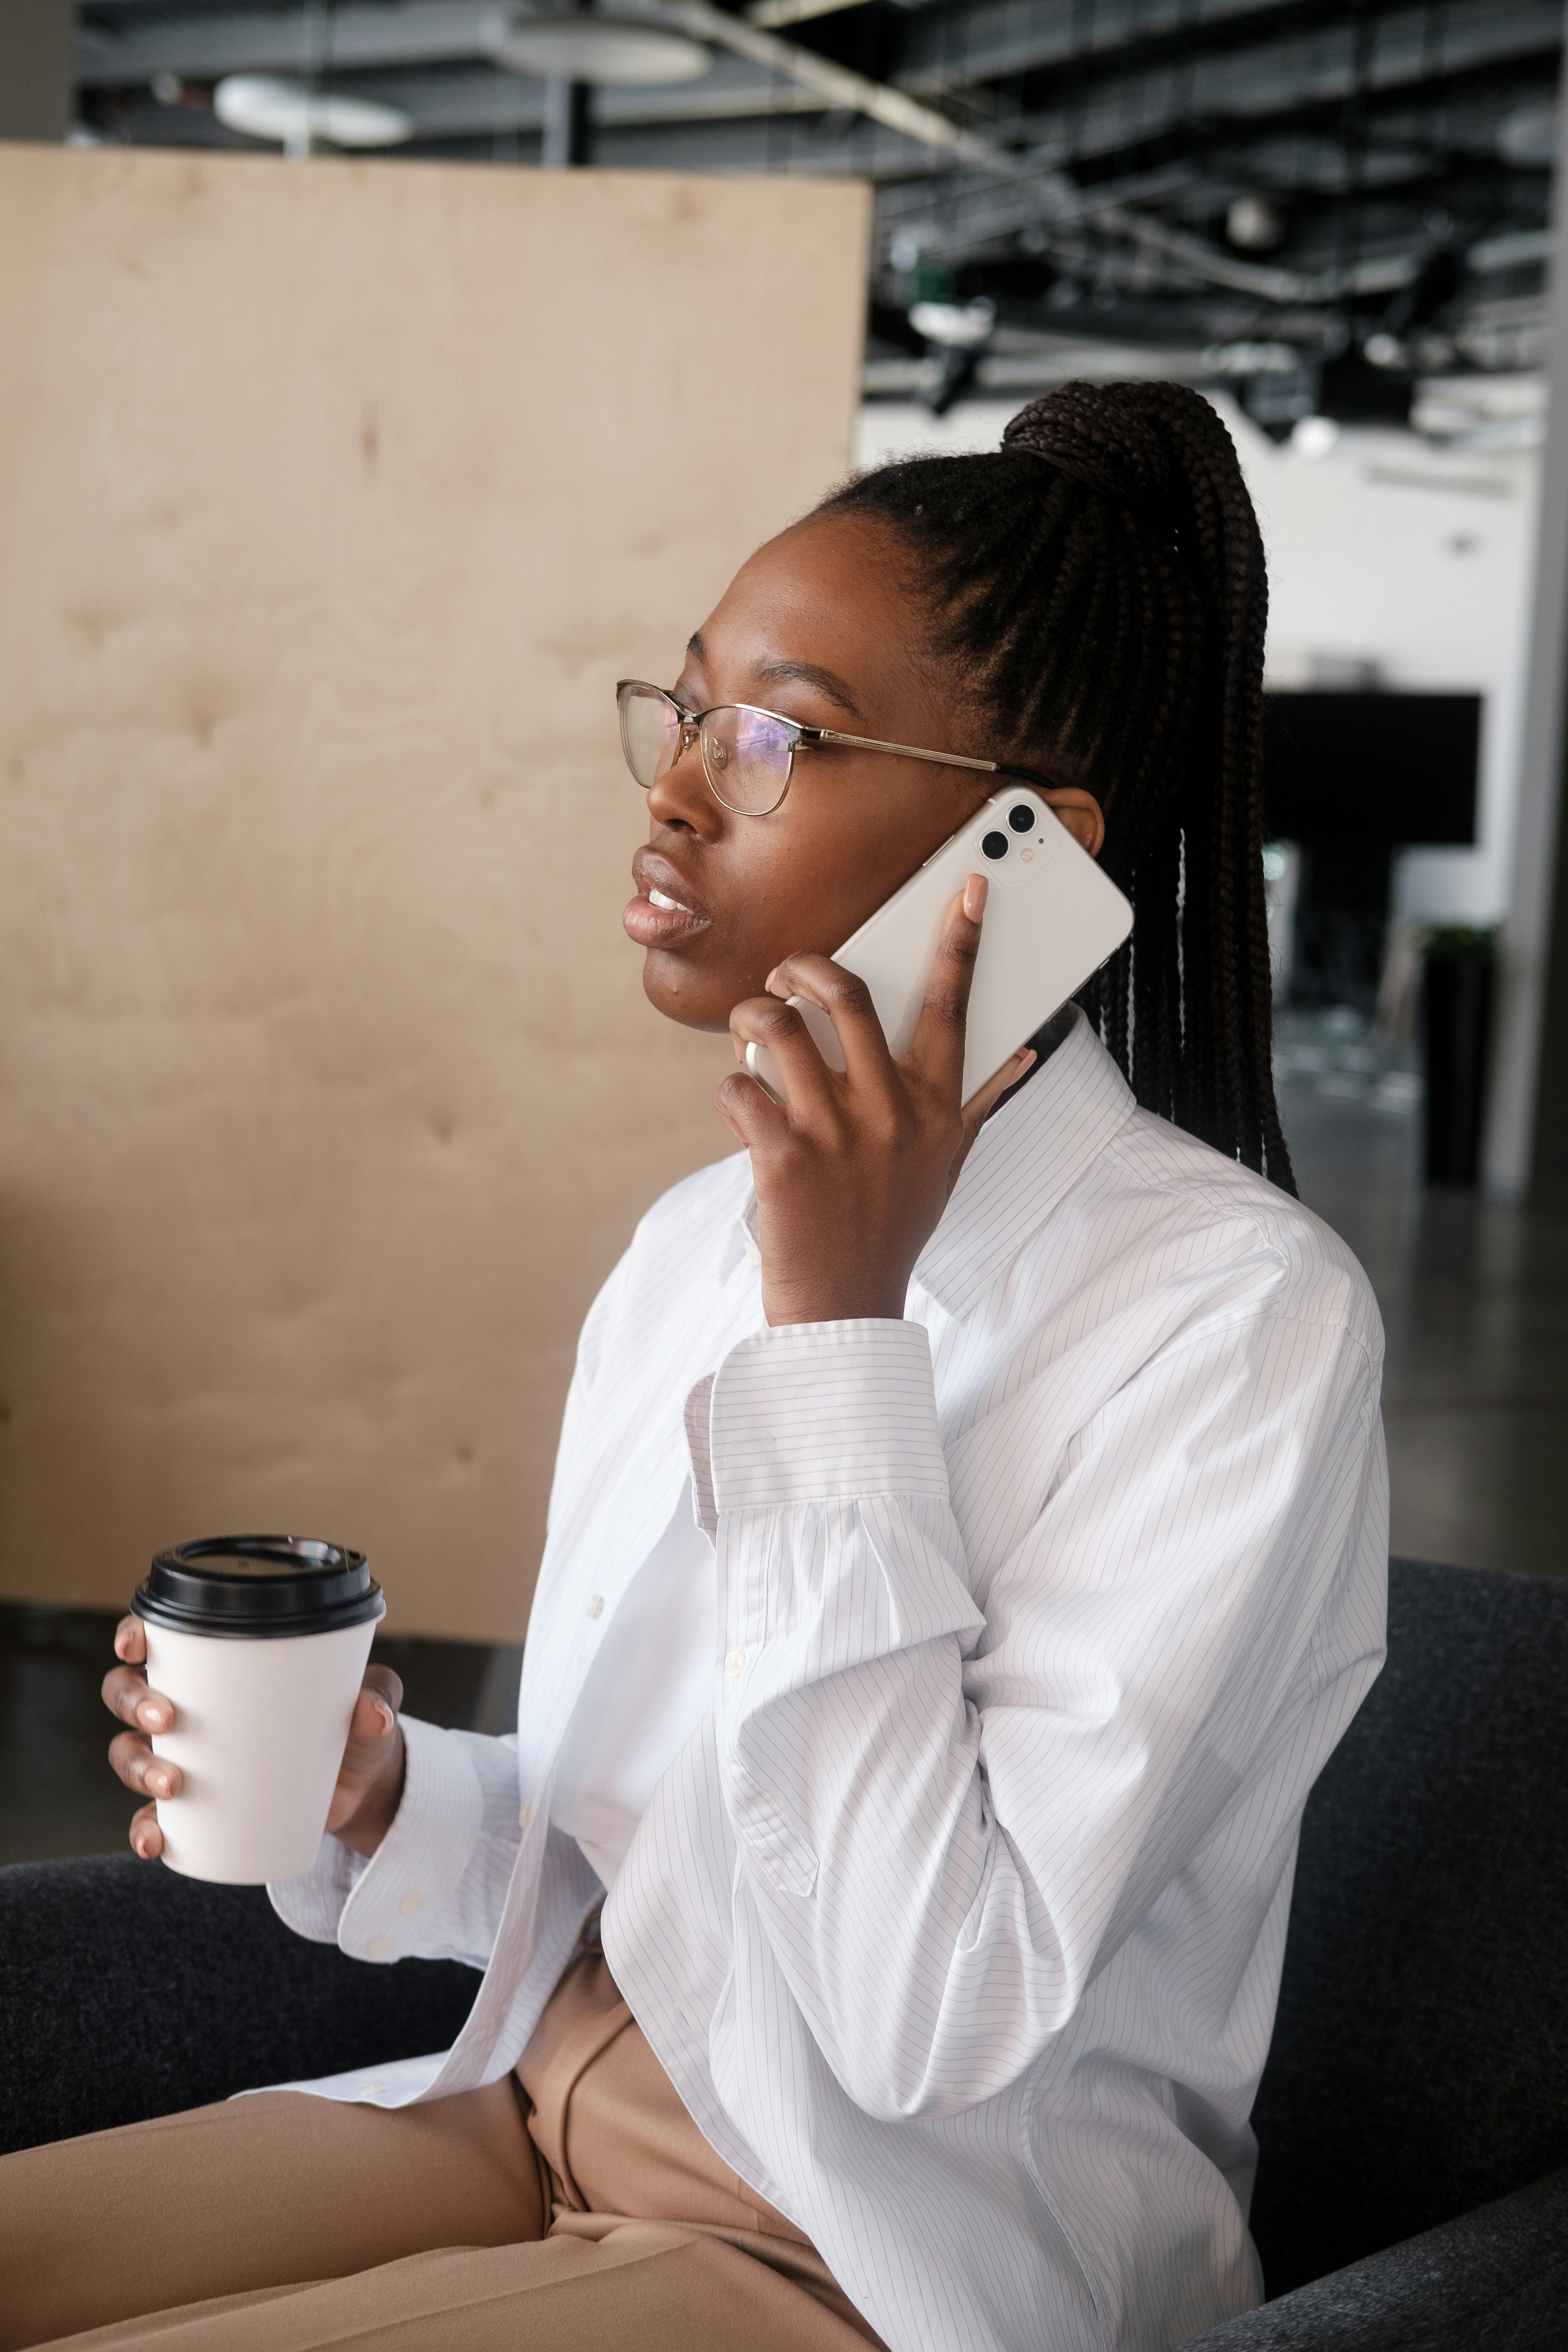 A woman on a phone call | Source: Pexels